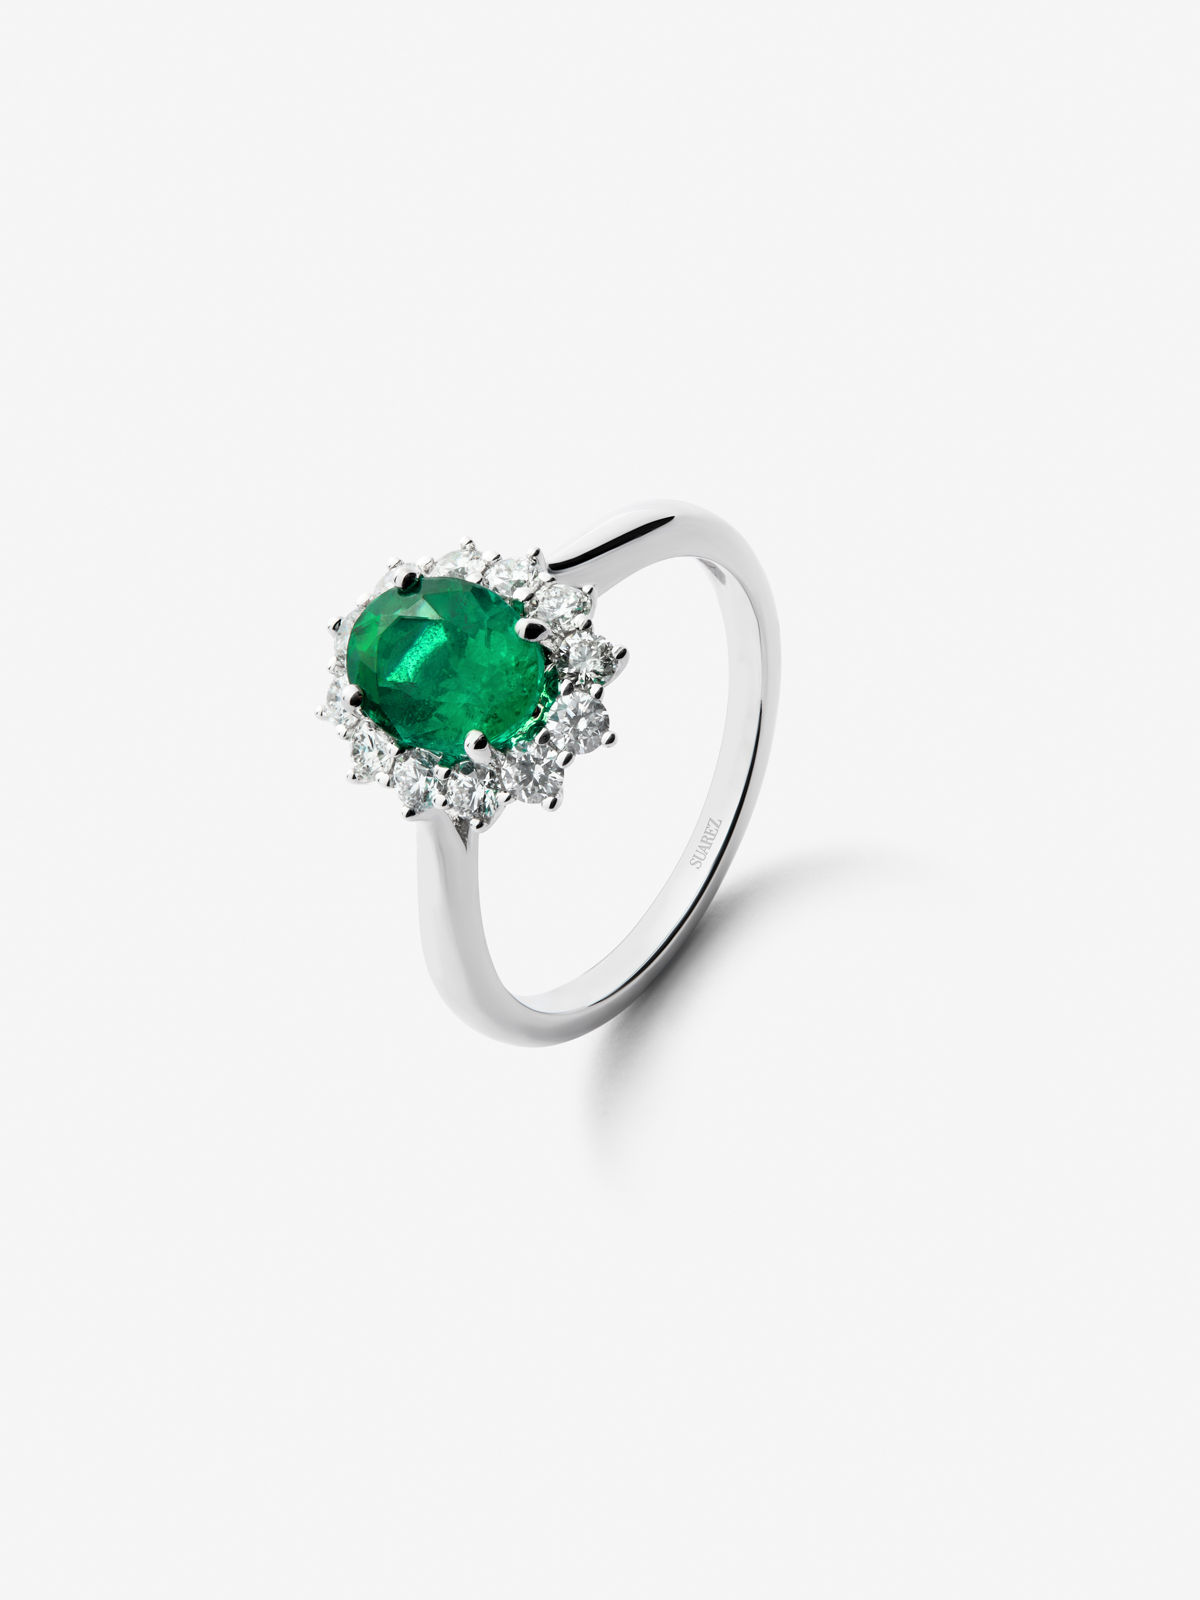 18K white gold ring with oval-cut green emerald of 1.42 cts and 12 brilliant-cut diamonds with a total of 0.45 cts